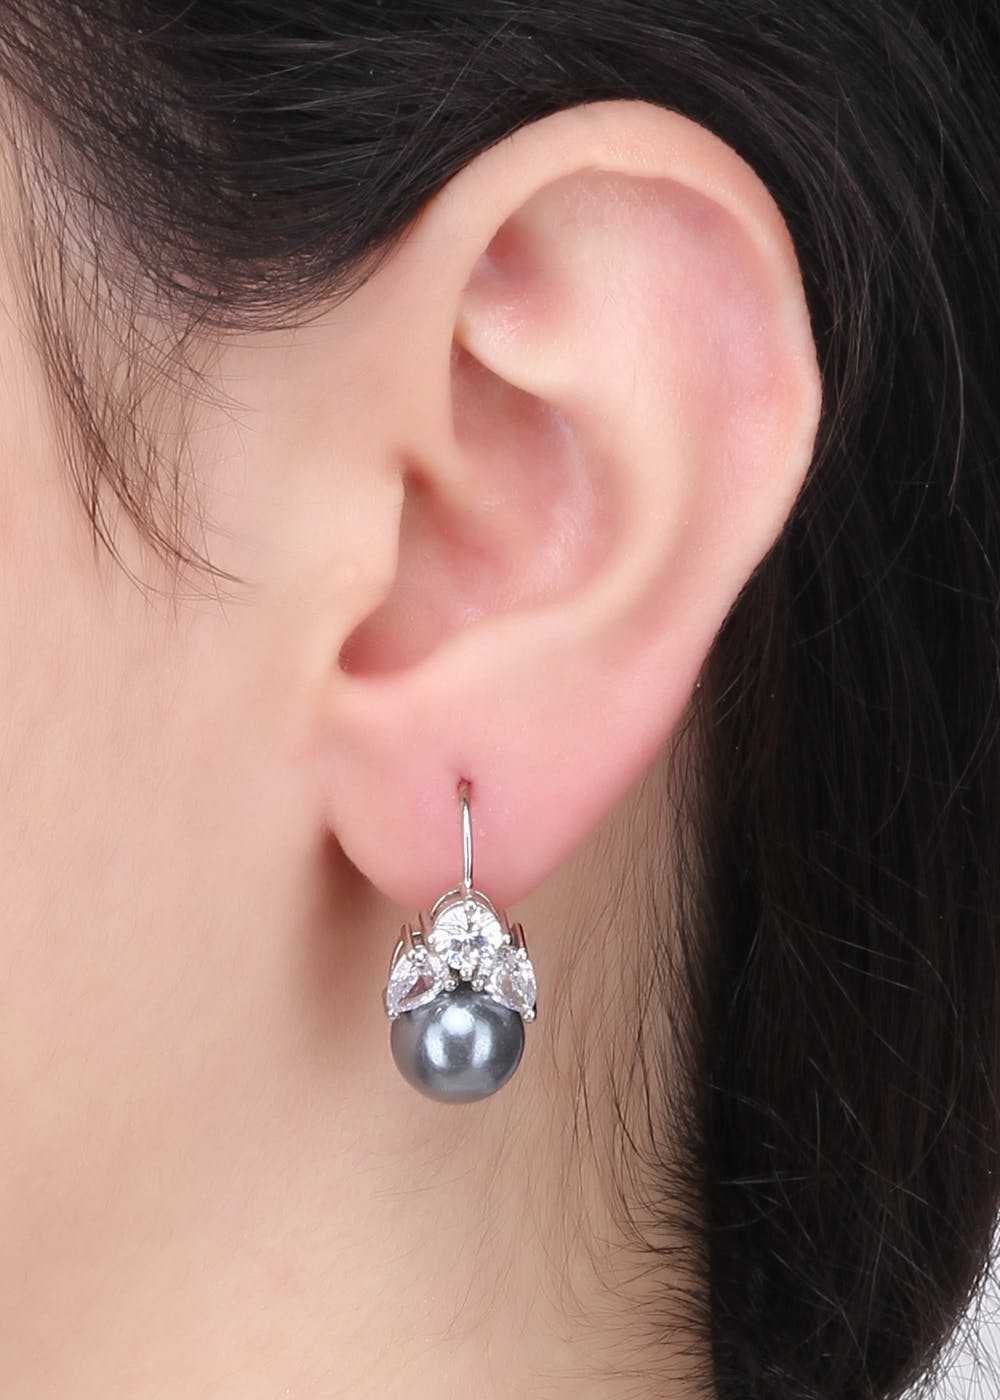 Beautiful Silver Pearl Earrings From Aham Jewellery  South India Jewels